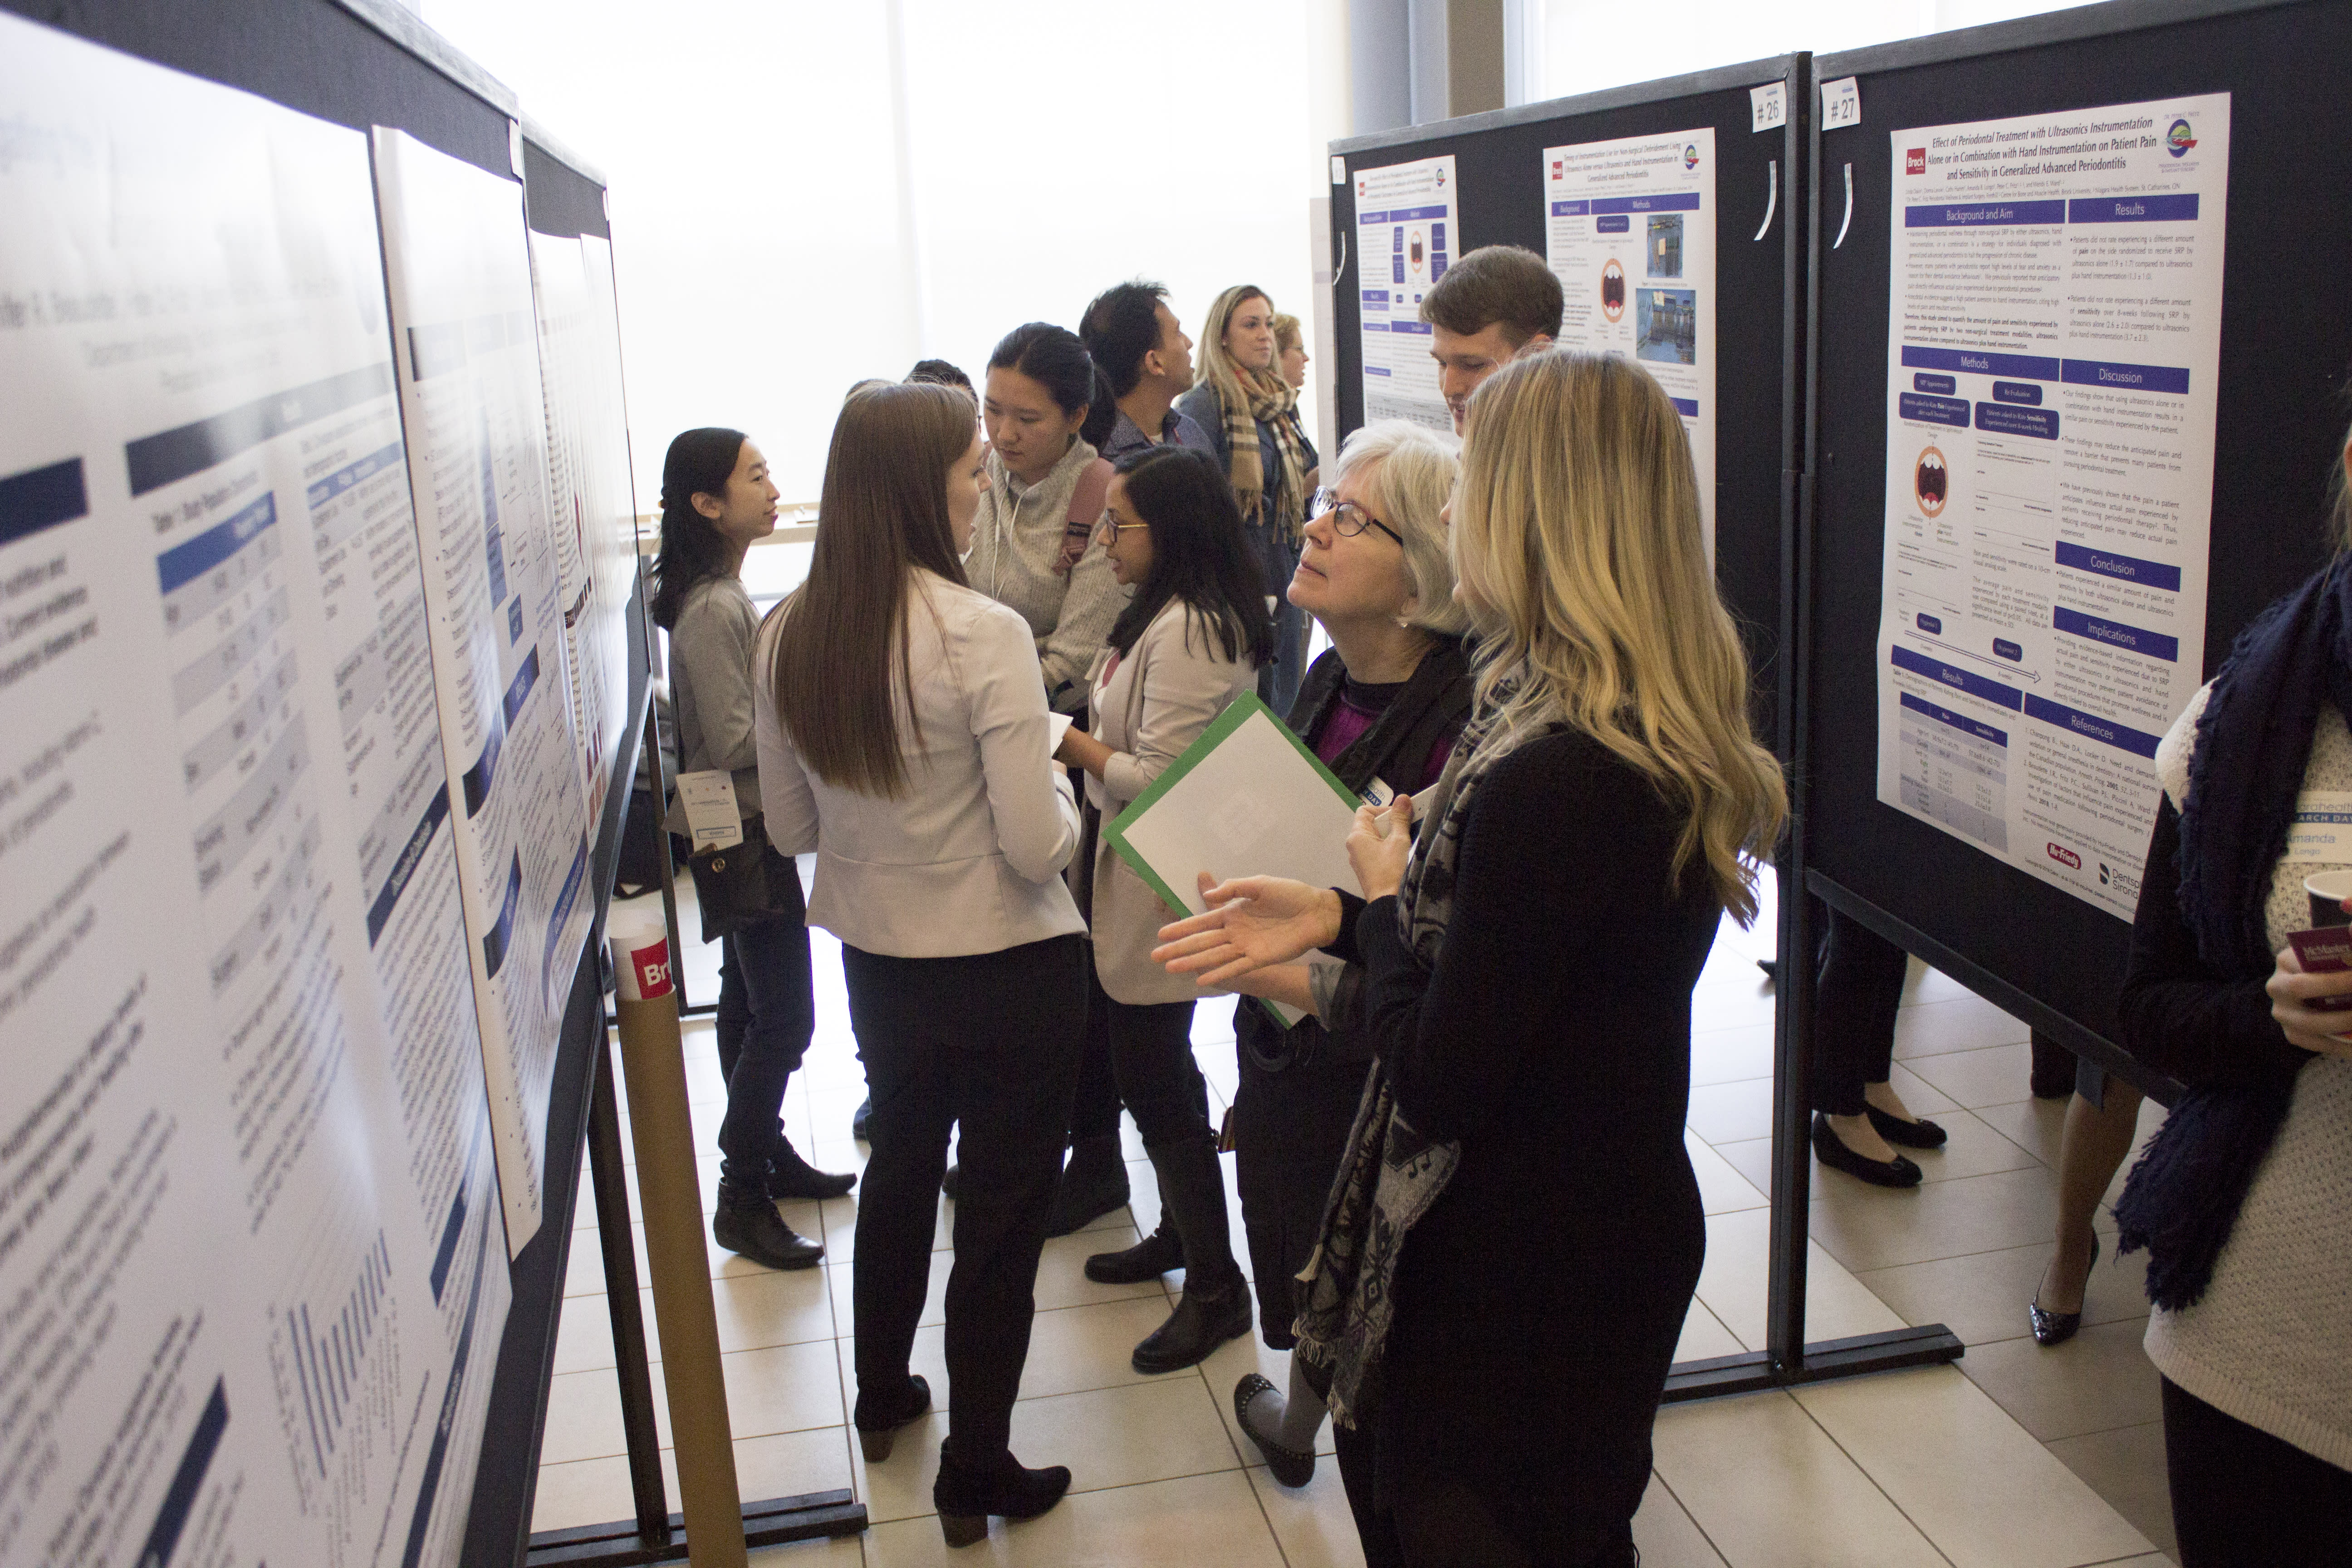 People gather around displays of posters describing research.